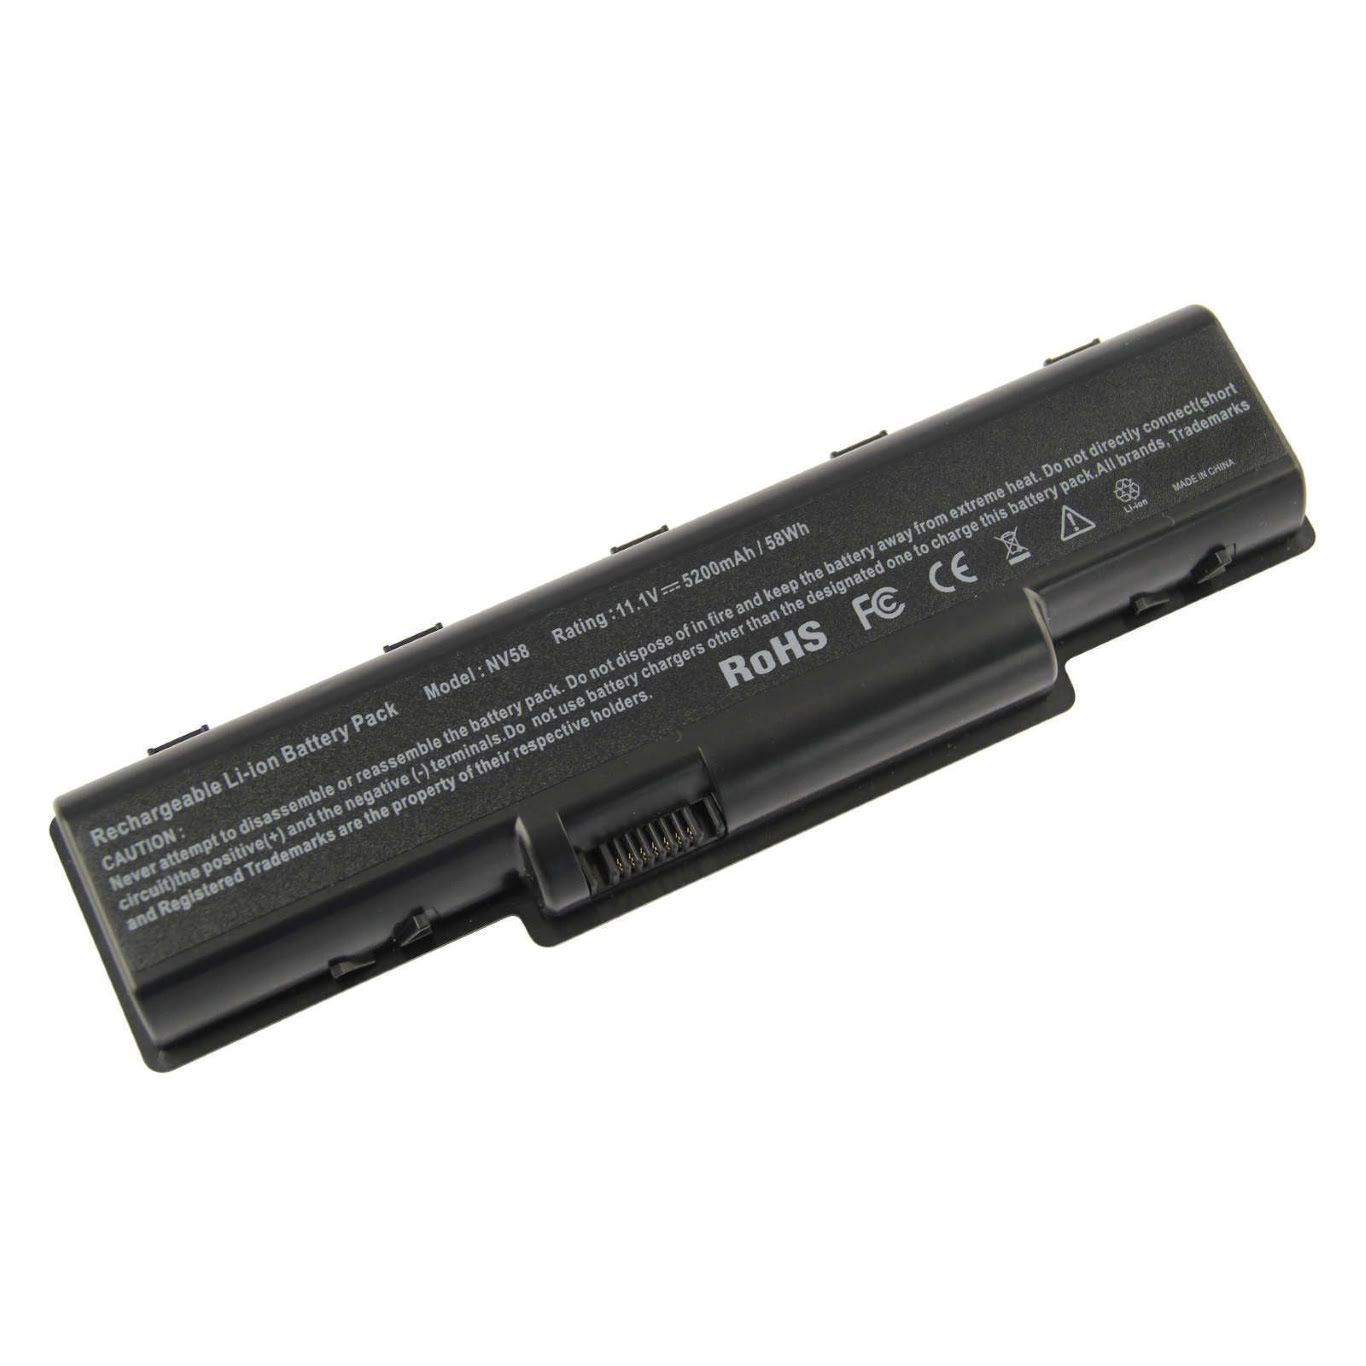 PREDATOR HELIOS 500 PH517-52-78QF Laptop Batteries for Acer replacement